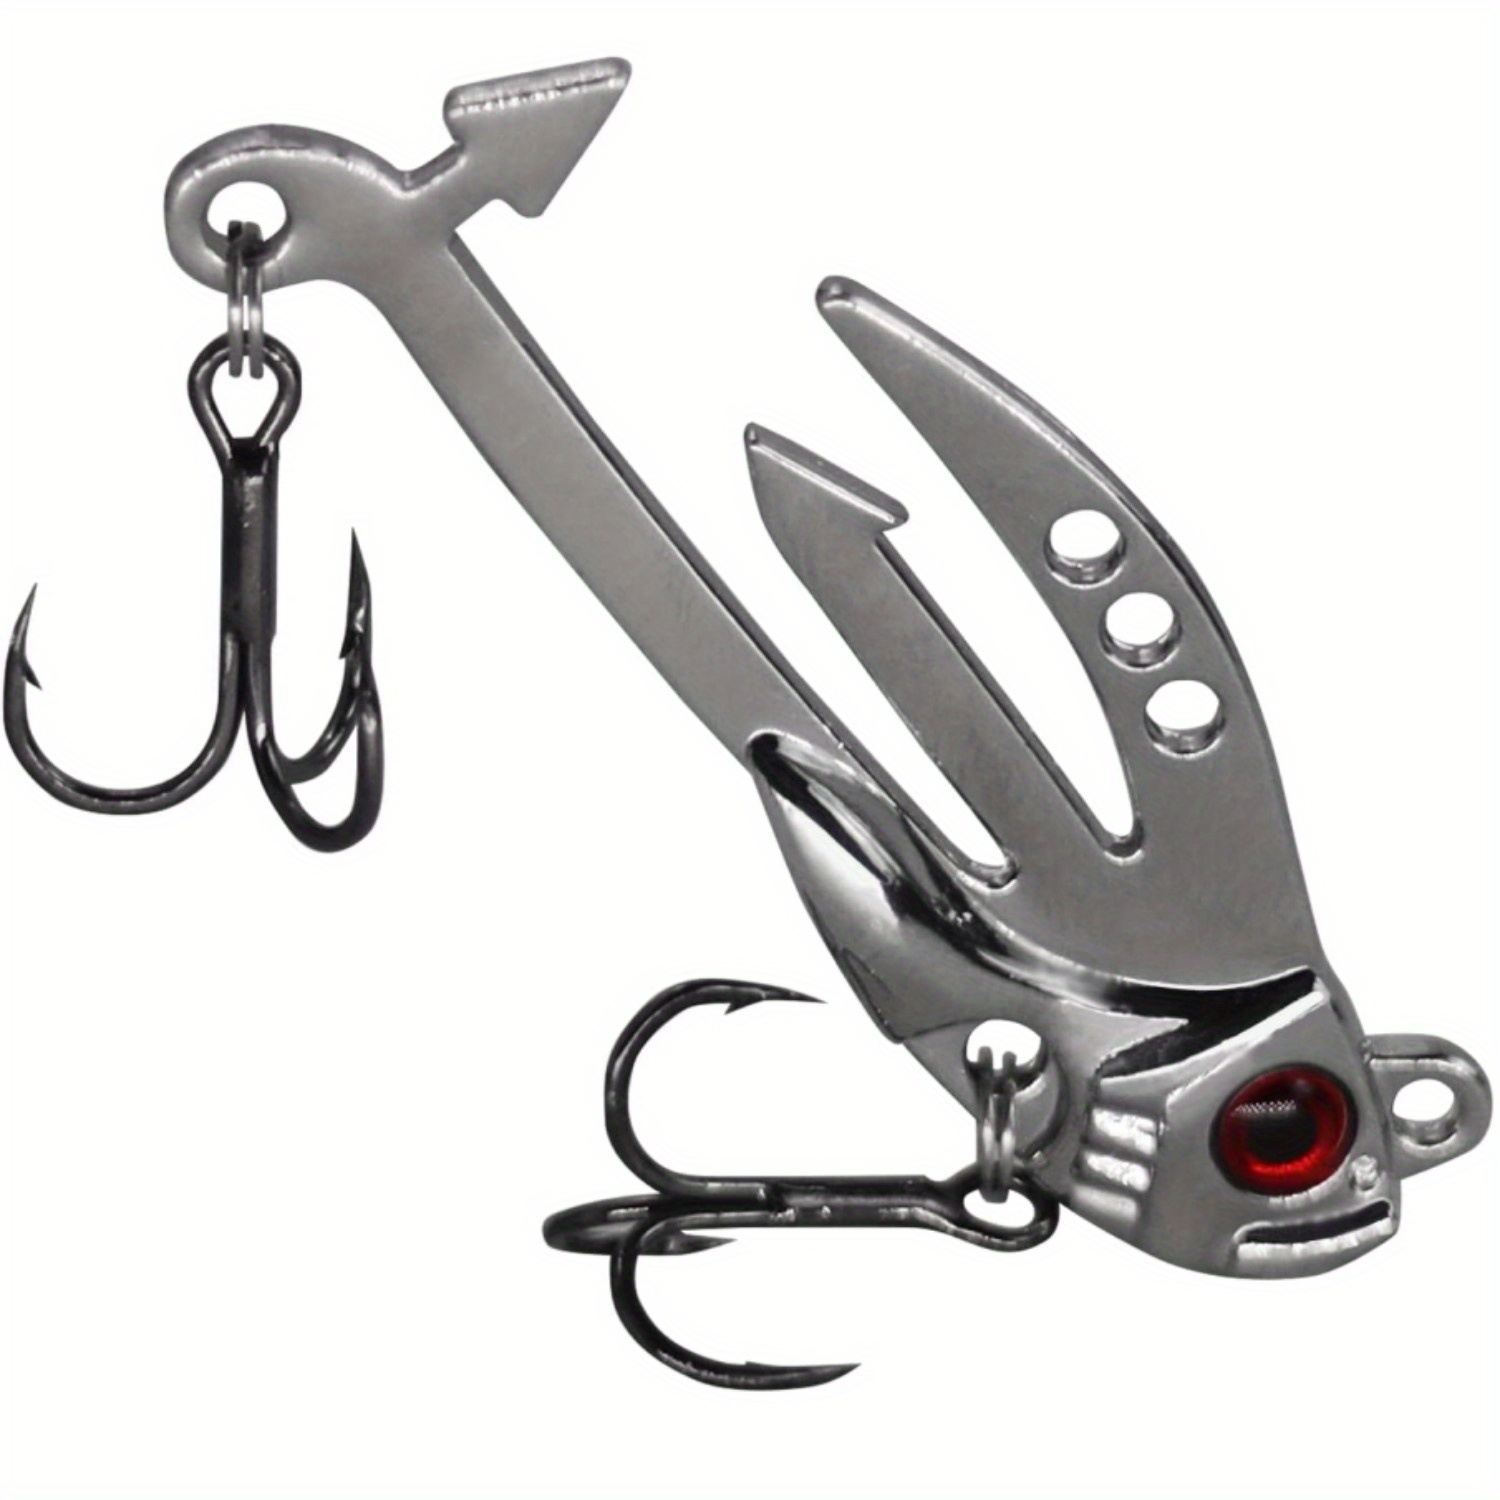 Metal VIB Hook Up Baits Set With Rotating Spoon And Vib Shovel For Bass And  Artificial Bait Blades 7g 15g Weight Range From Ning07, $10.71